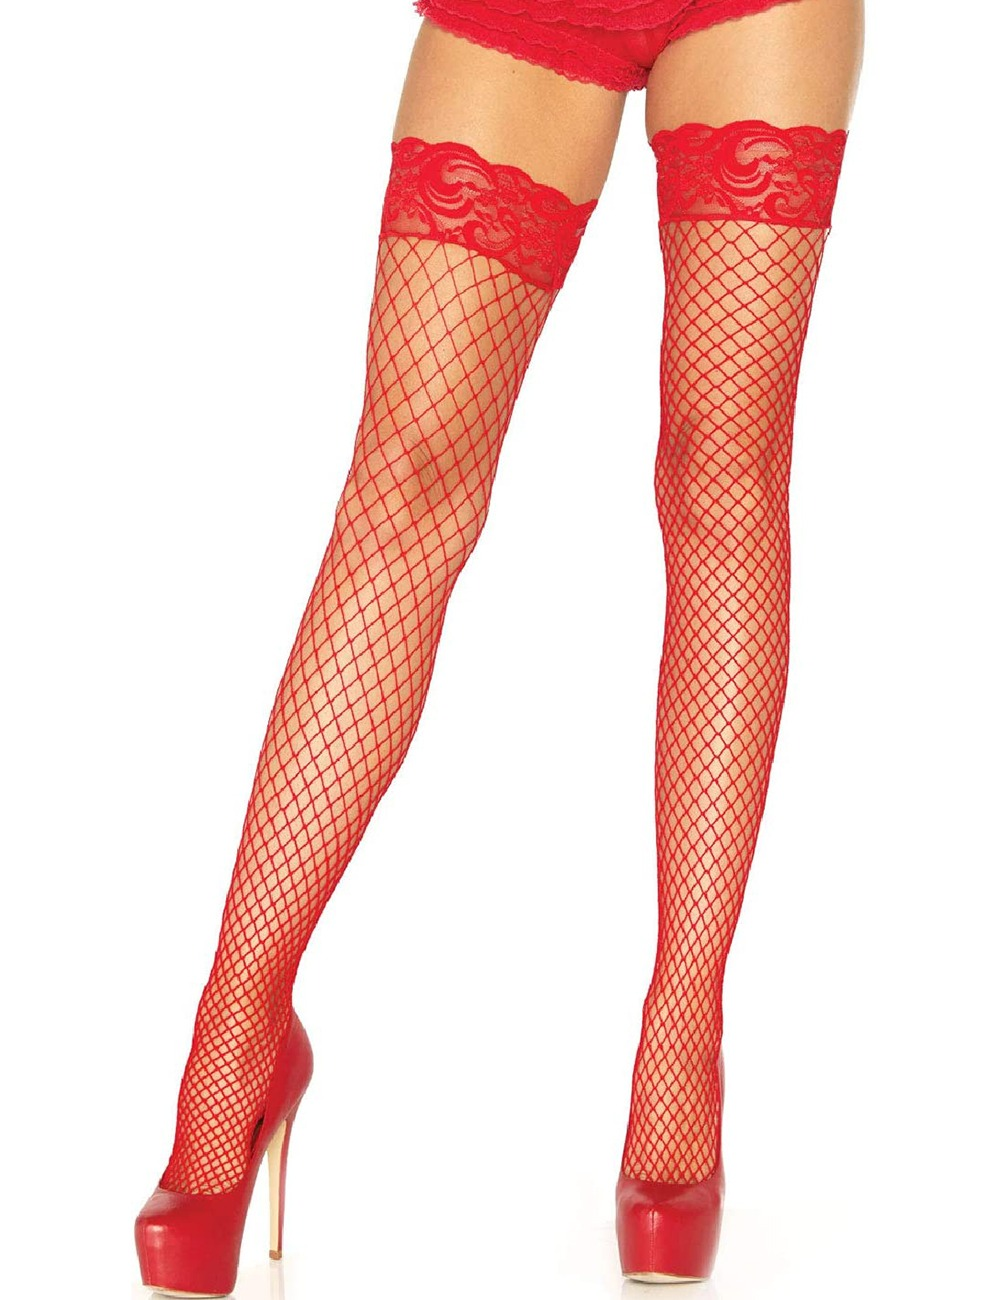 3501--Sexy fishnet garter non-slip silicone lace over-the-knee socks